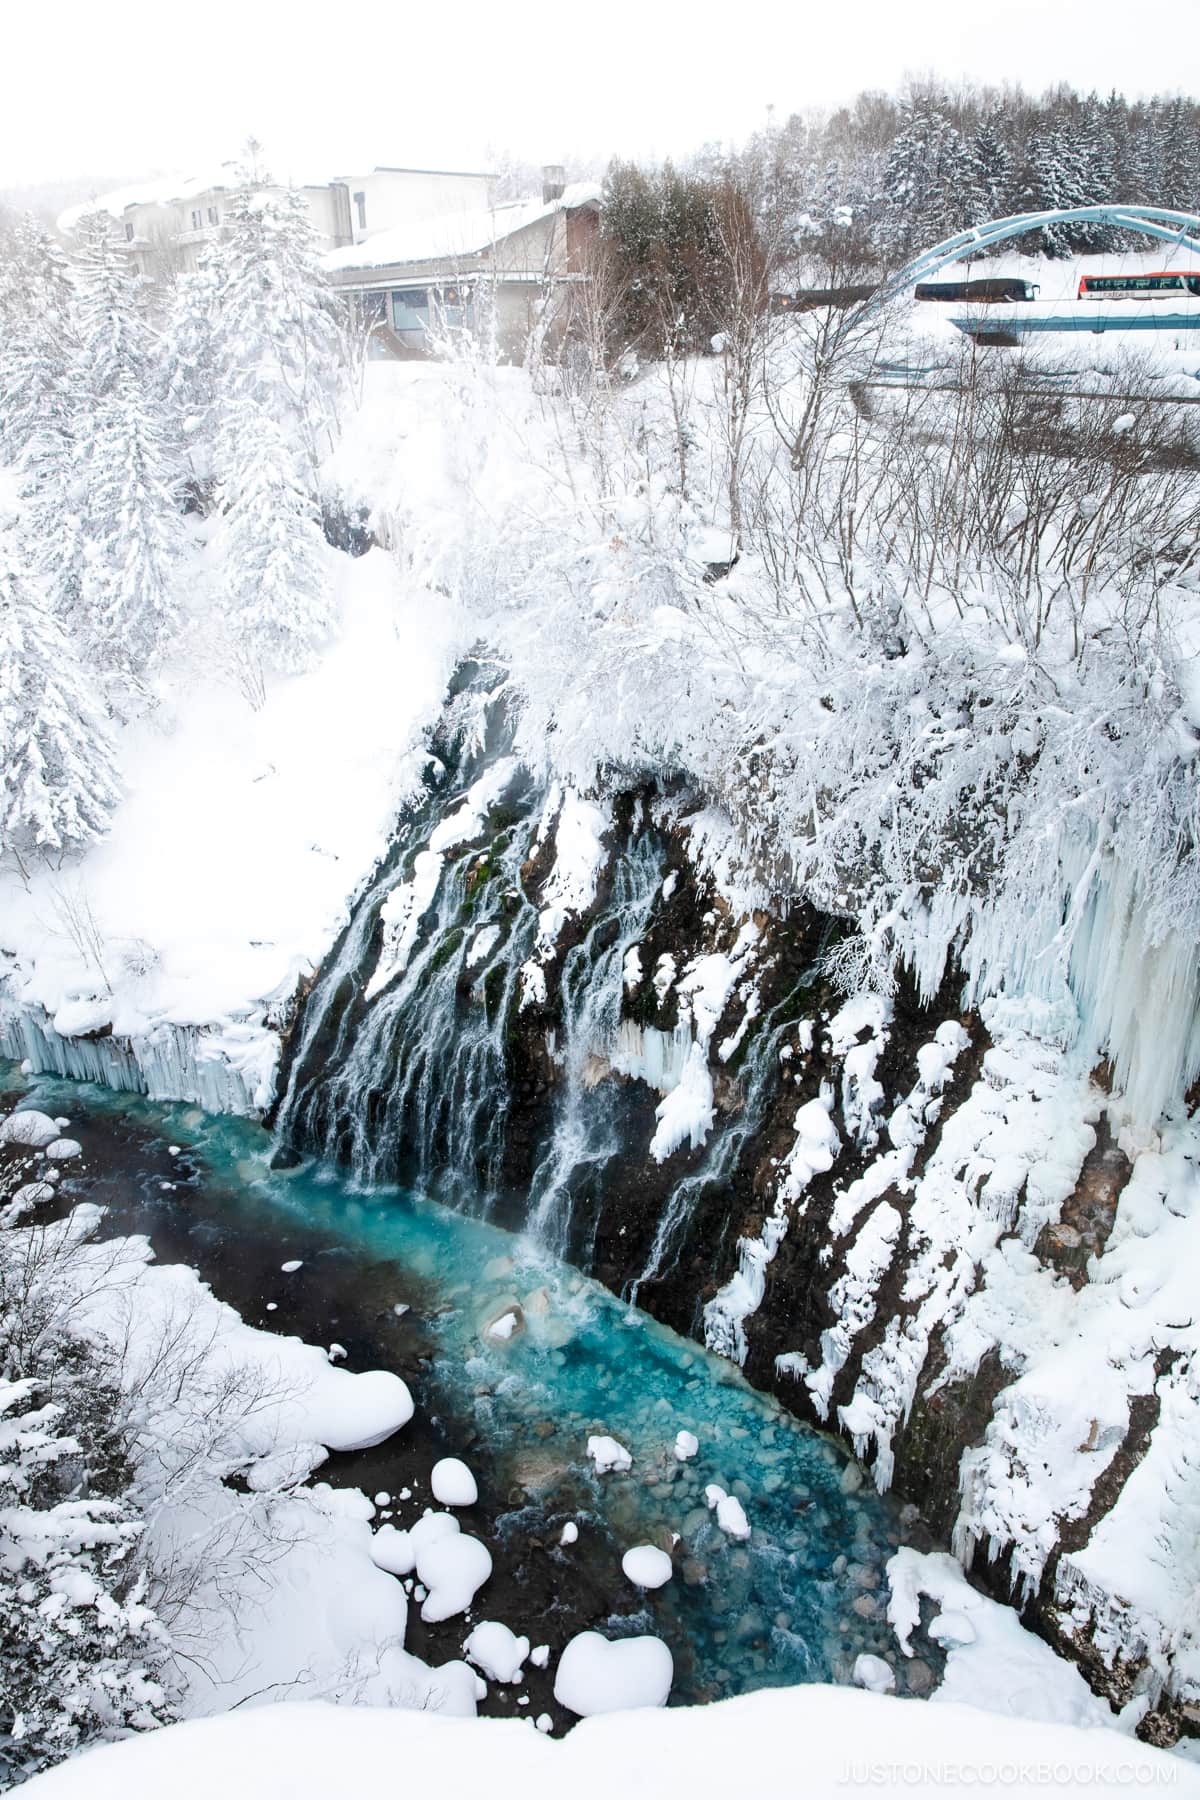 Frozen waterfall covered in snow and a blue river at the bottom